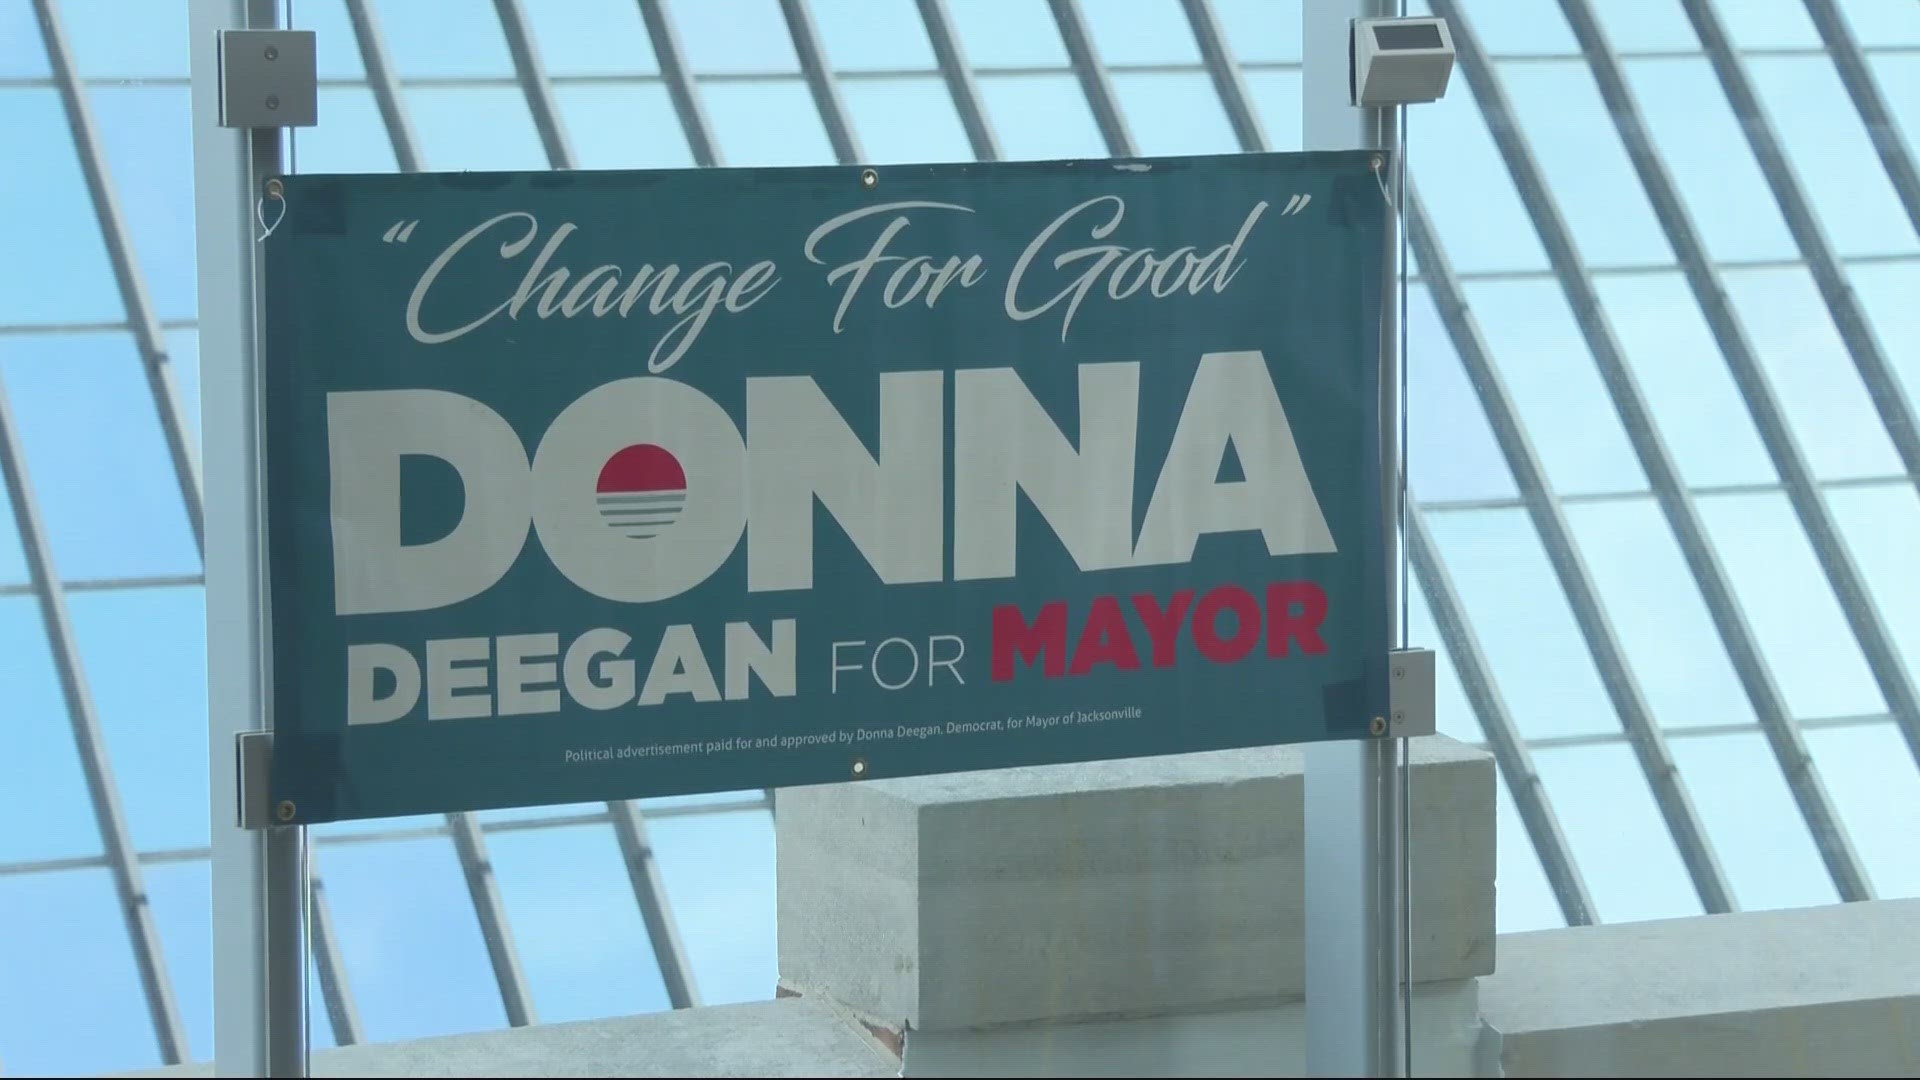 Donna Deegan said her boots-on-the-ground approach to campaigning door-to-door worked and she has no plans to stop before the next election.